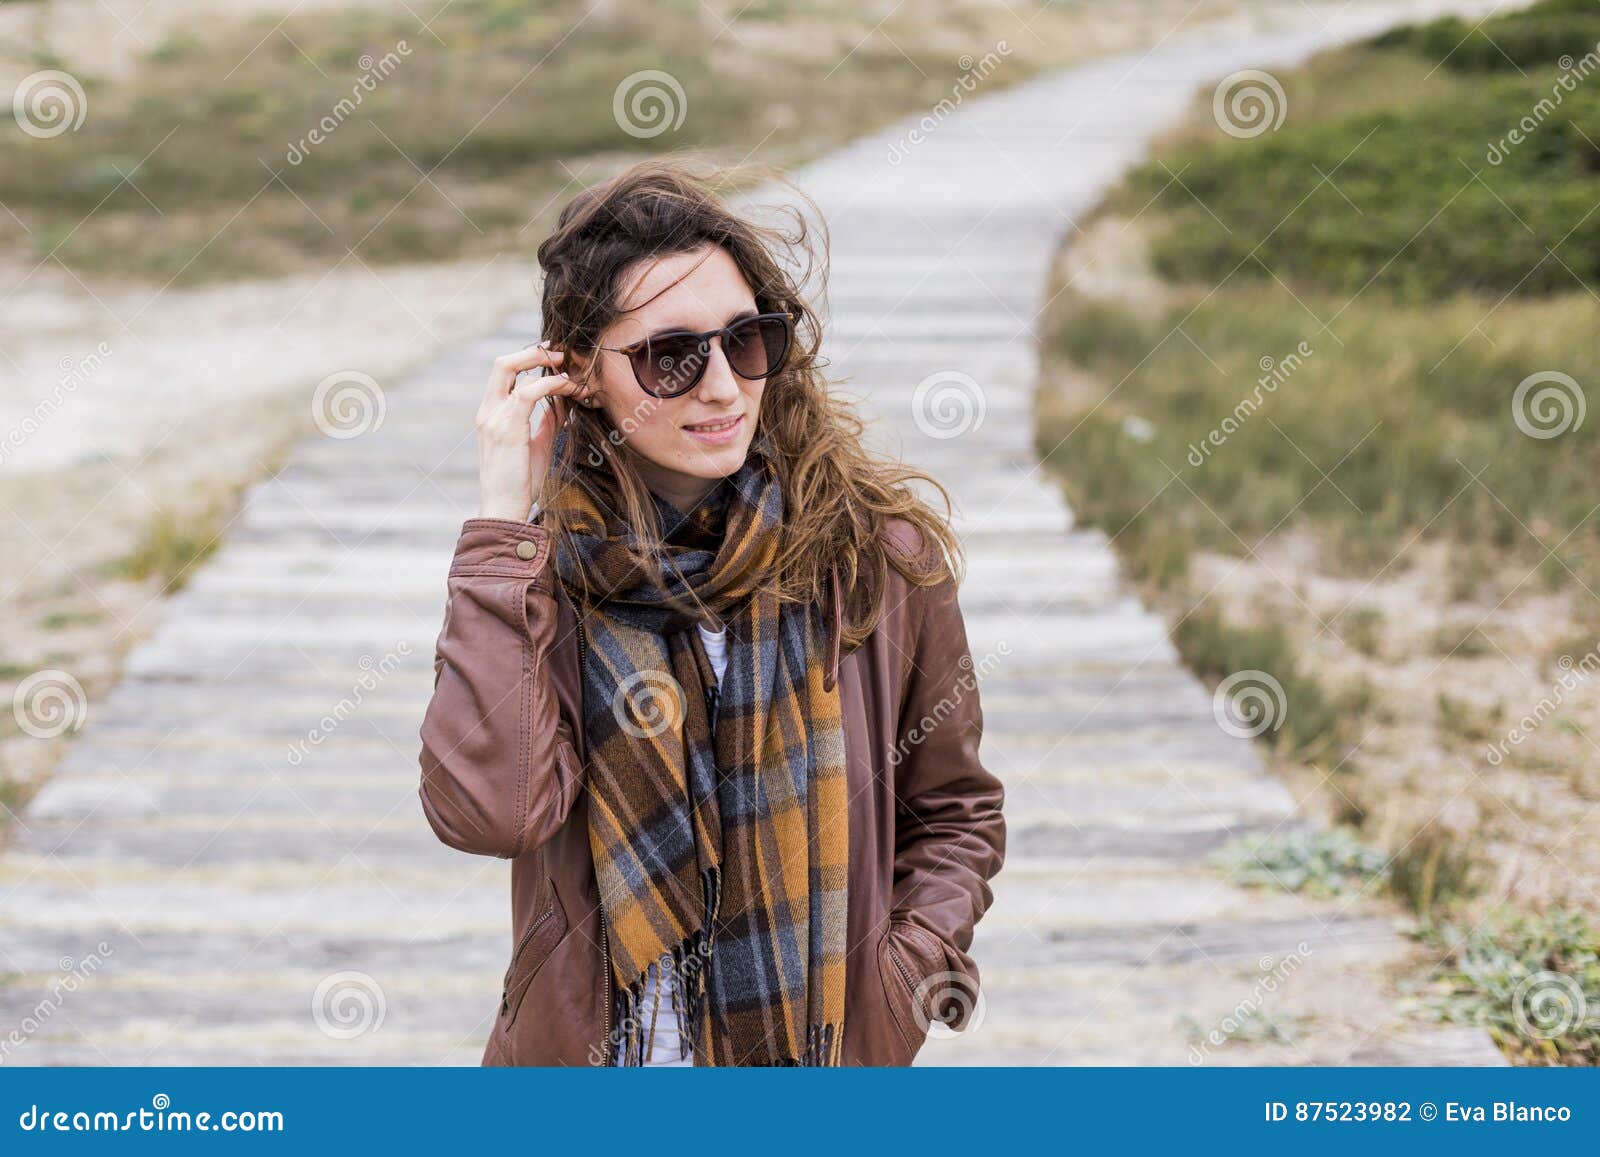 young woman outdoors portrait on a windy day